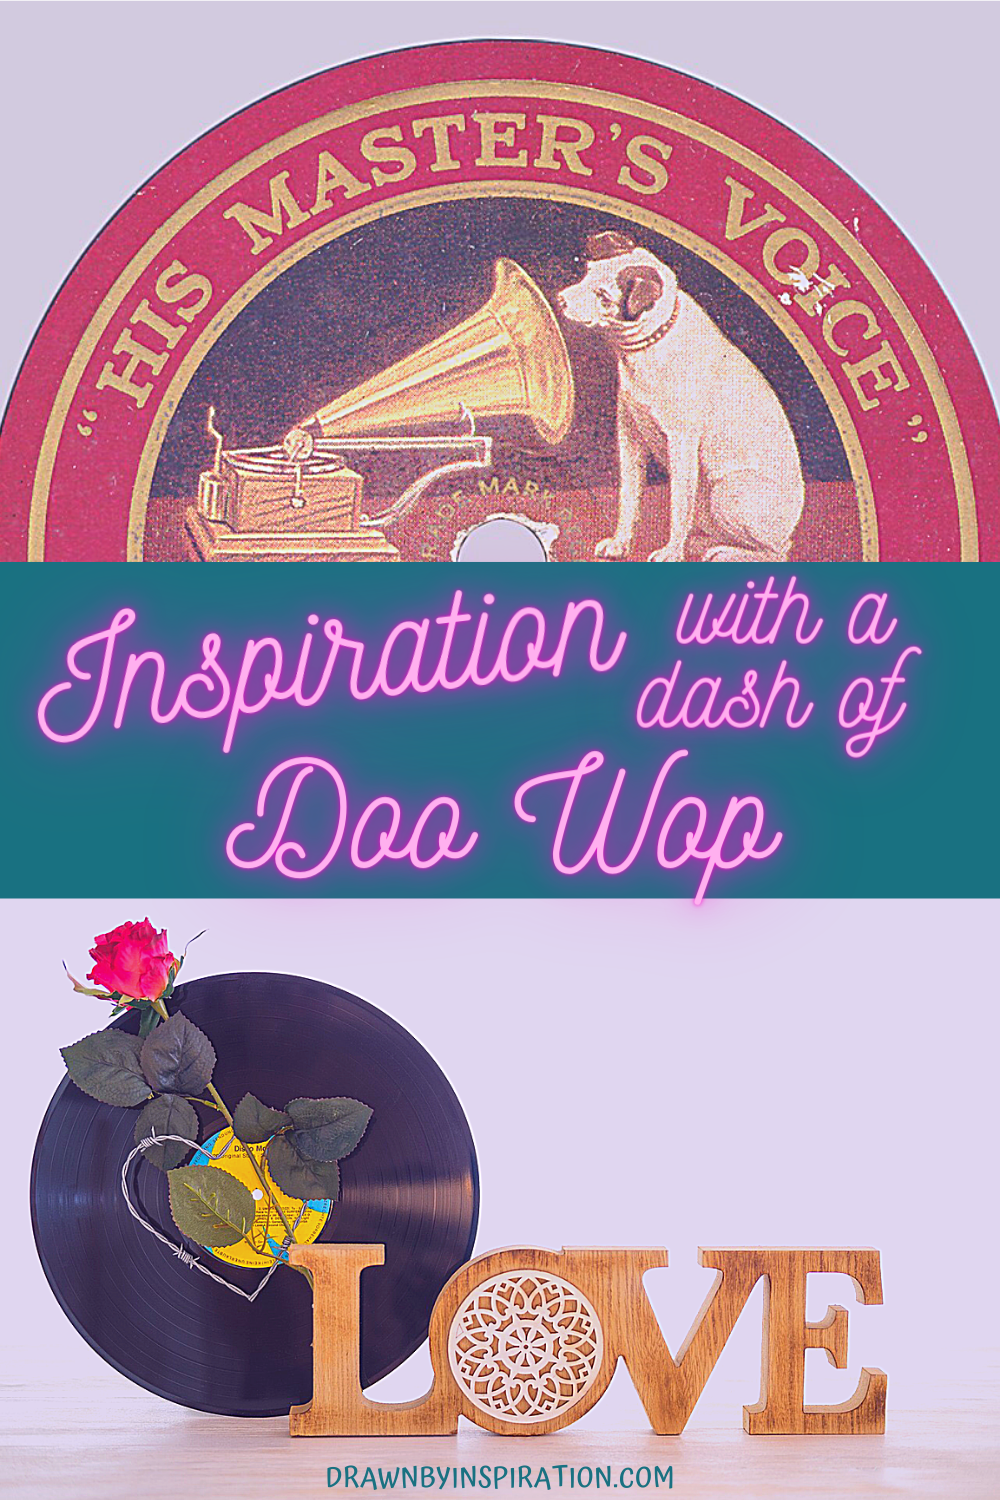 Cover image inspiration with a dash of doo wop